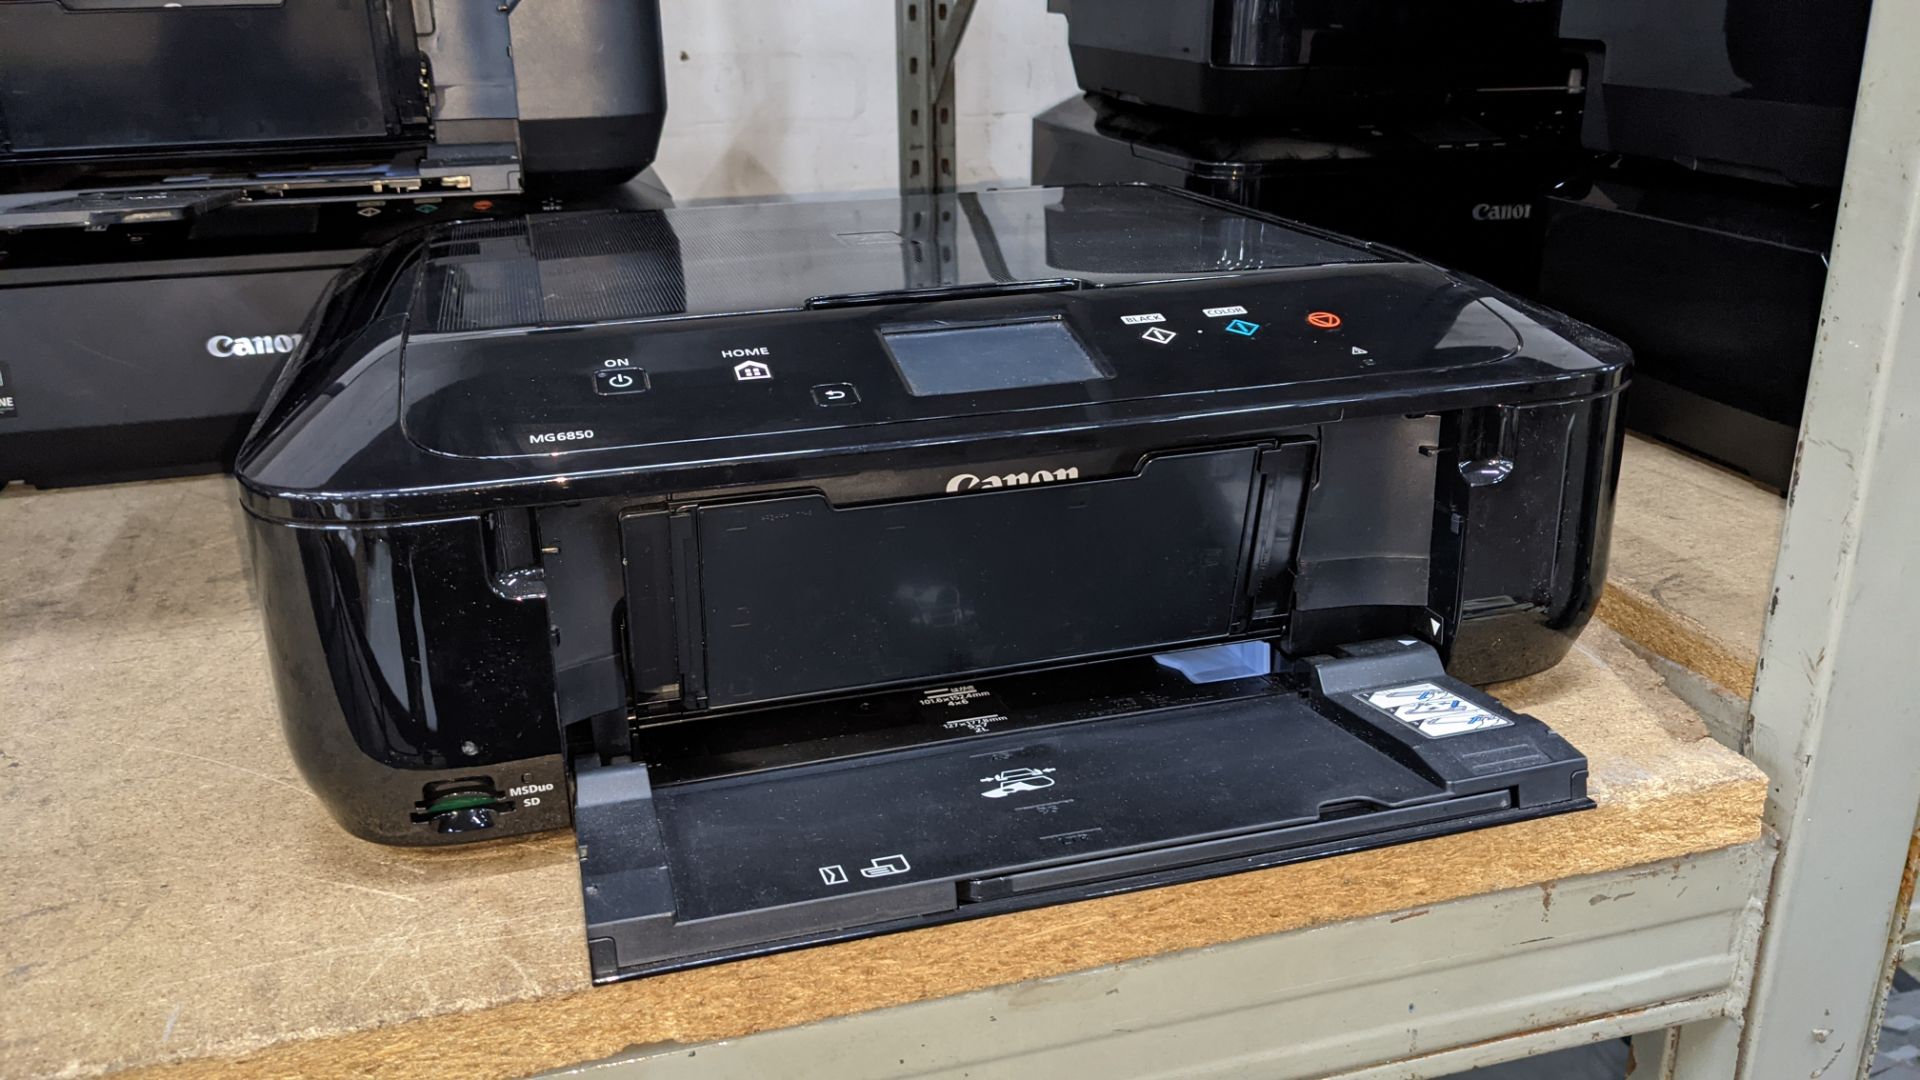 3 off Canon Pixma printers each with built-in flatbed scanners NB. No power leads & cables - Image 4 of 6